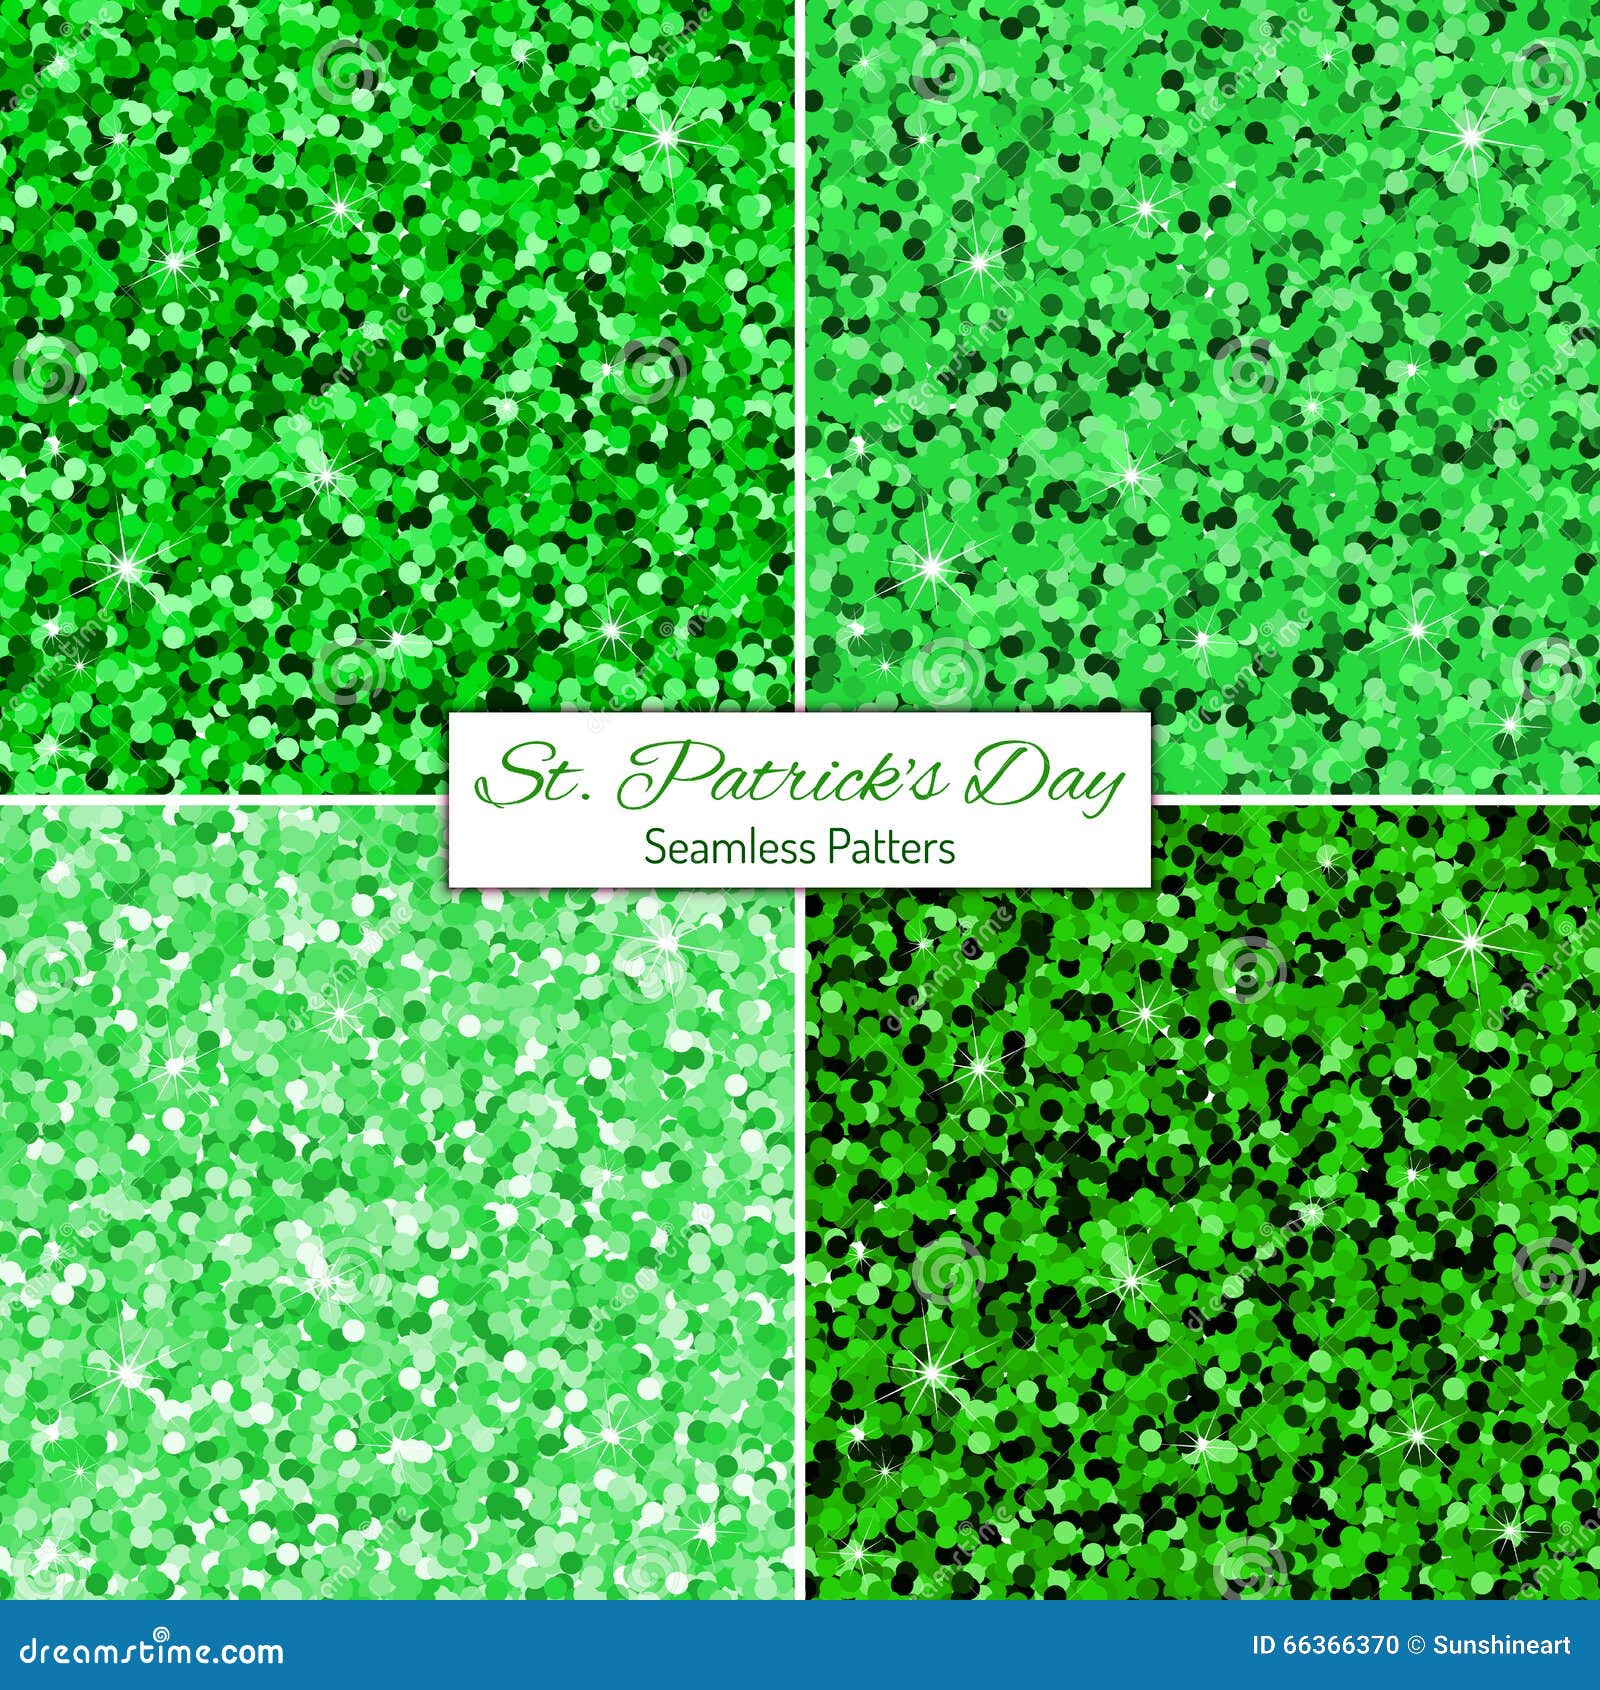 Green Glitter Vector Images (over 27,000)